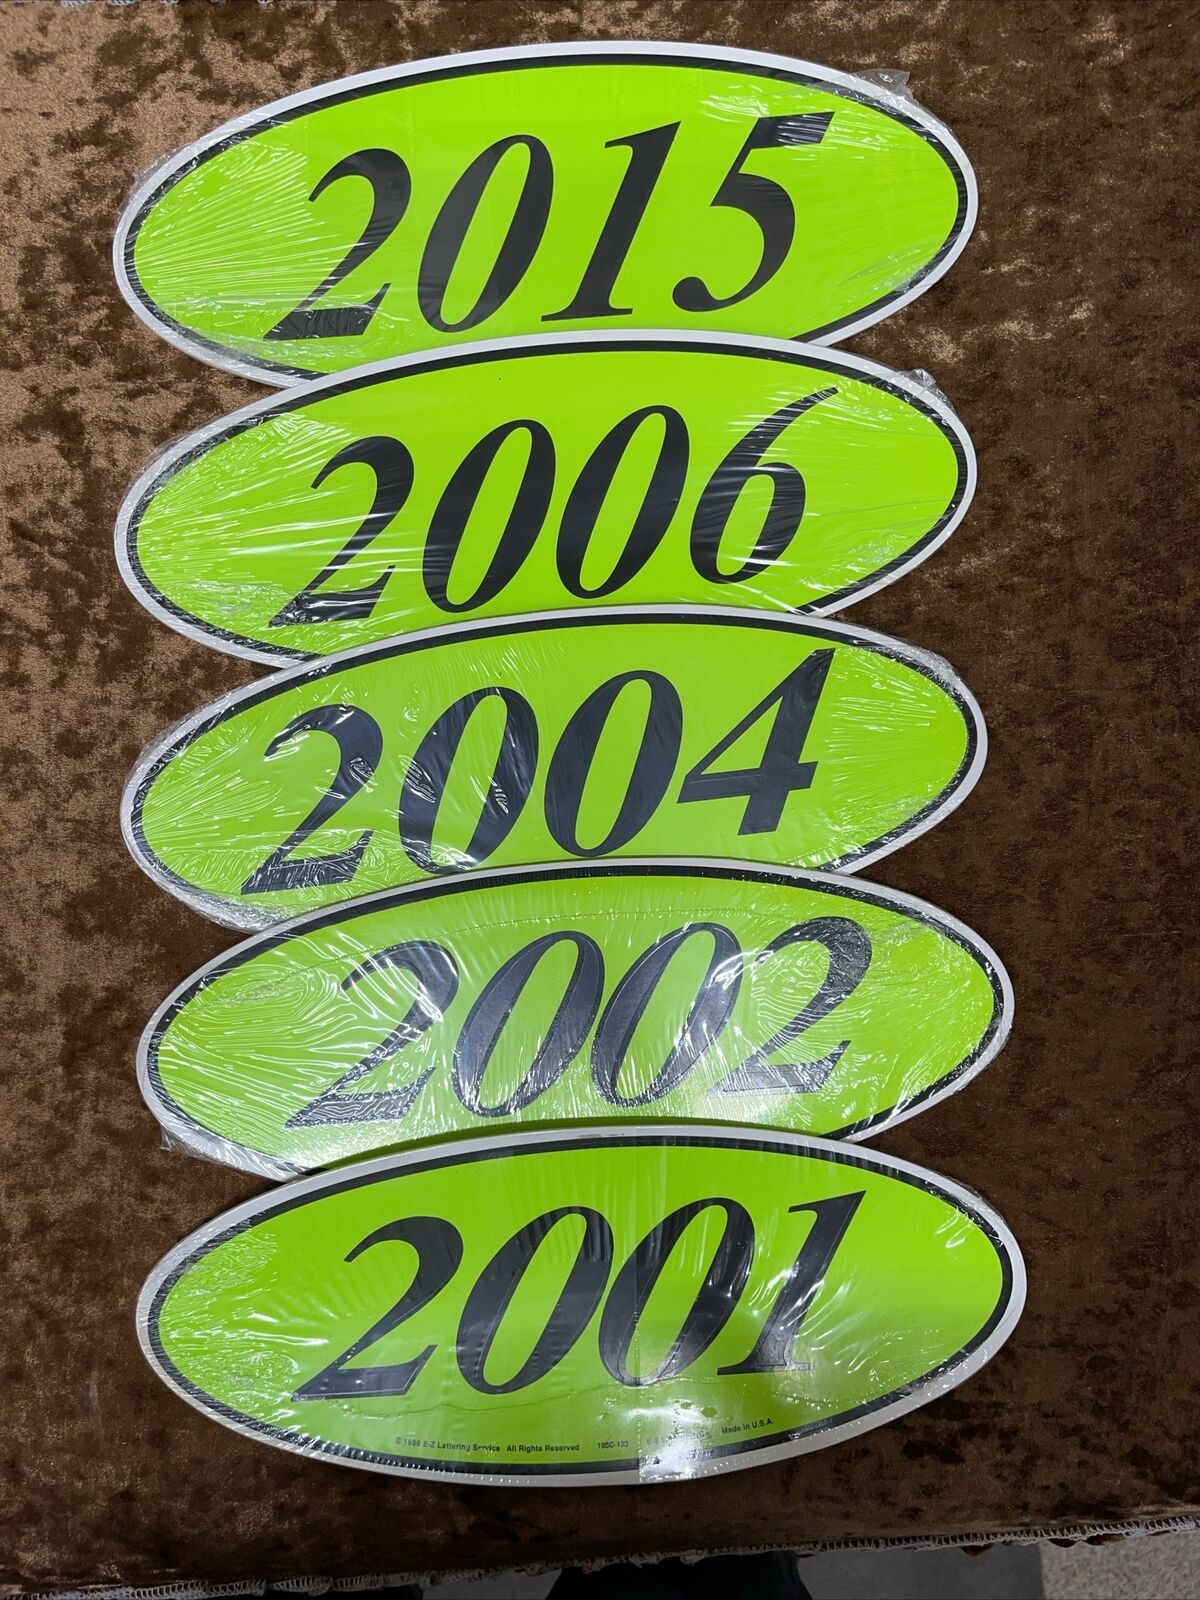 01,02,04,06,and 15 CAR DEALER OVAL MODEL YEAR WINDSHIELD DECALS 1 DOZEN OF EACH